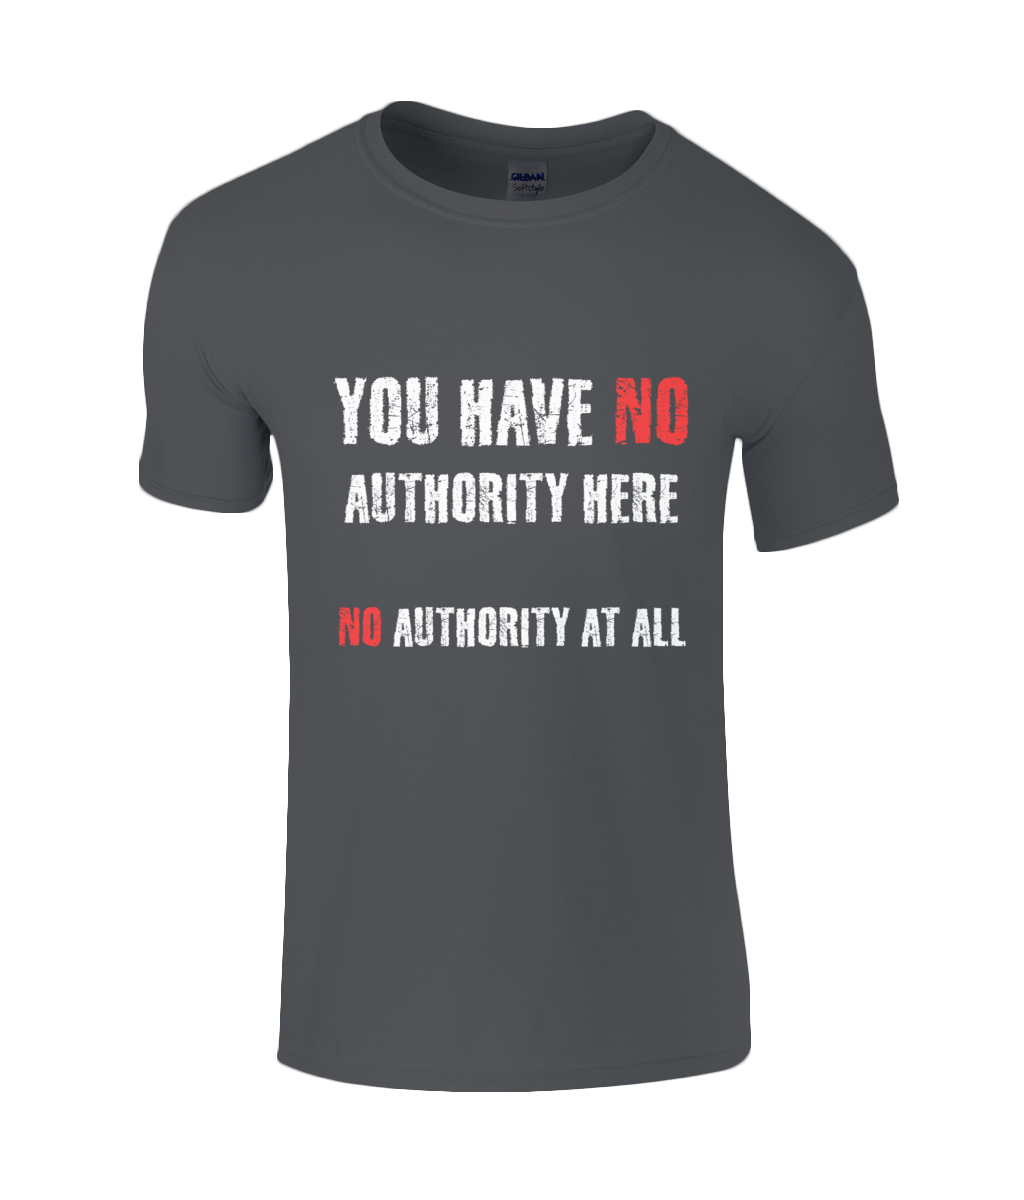 You have NO authority - No authority at all T-Shirt – ELLO-WORLD